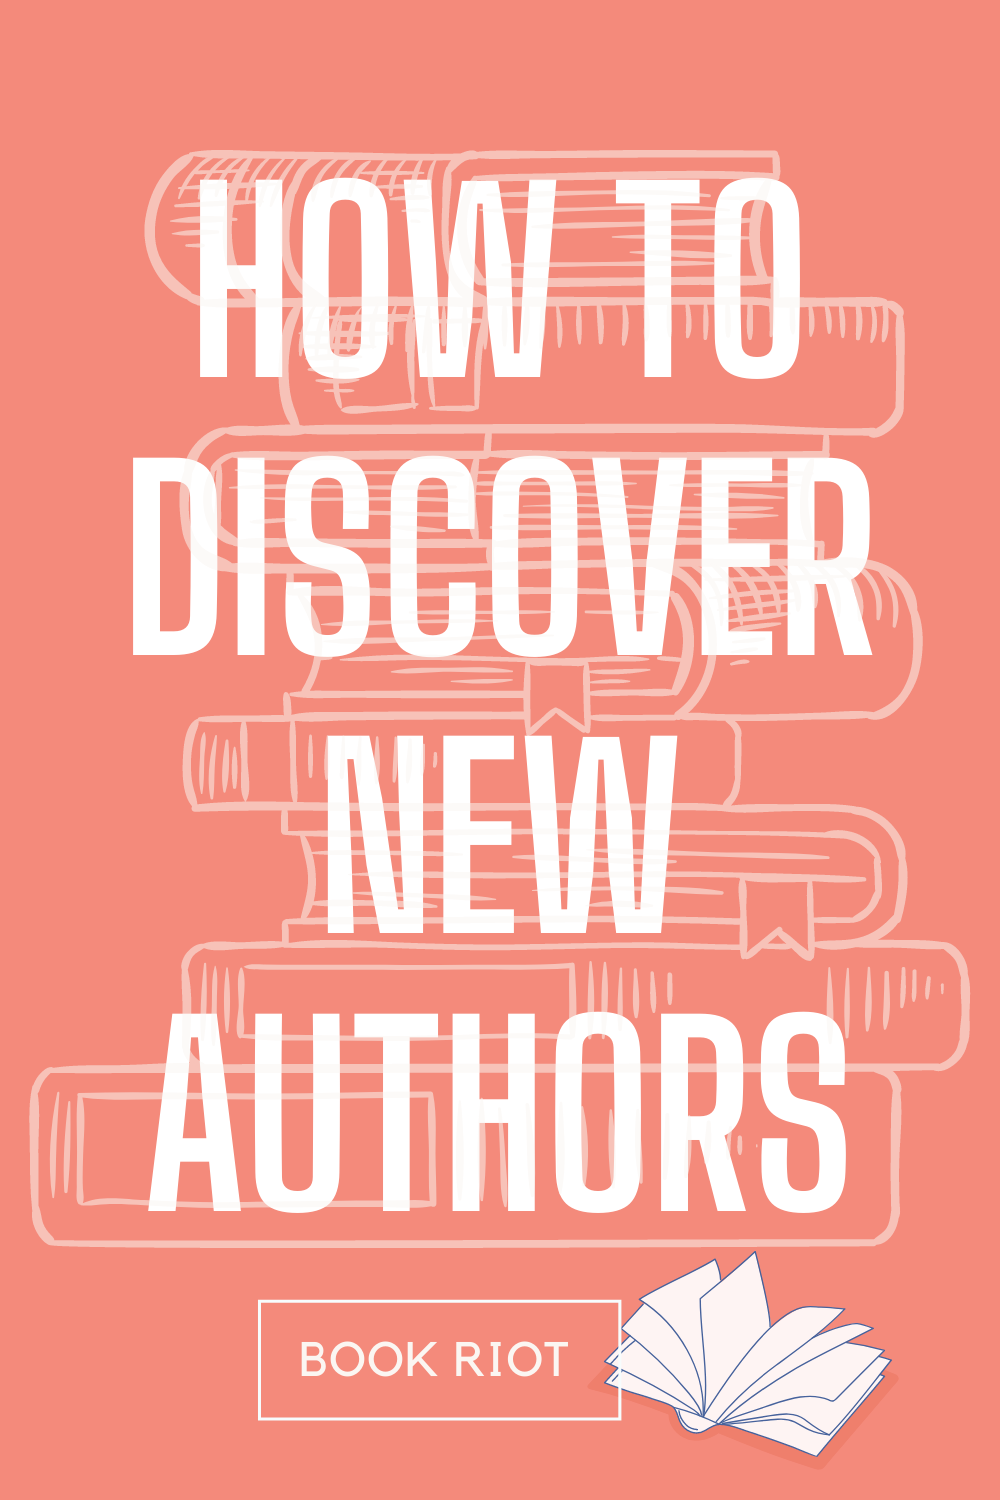 Discovering New Authors A Guide for Getting out of Your Comfort Zone